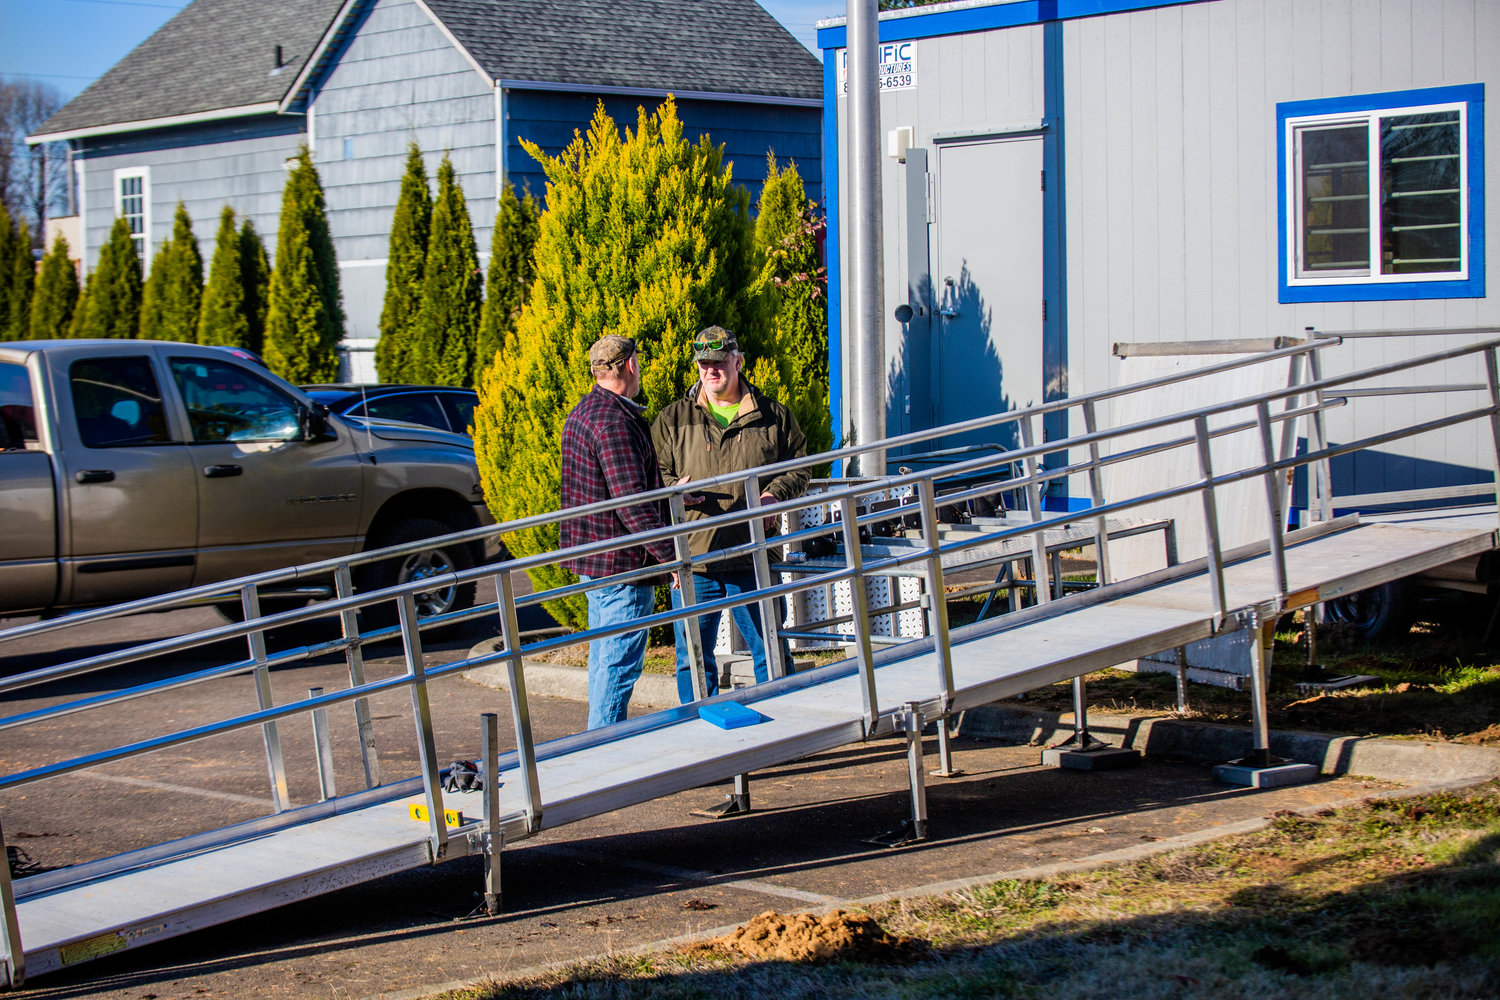 Twin Cities Rotarians Michael Ervin and Greg Mitchell work on an aluminum ramp Saturday afternoon for a portable building outside the Veterans Memorial Museum in Chehalis.